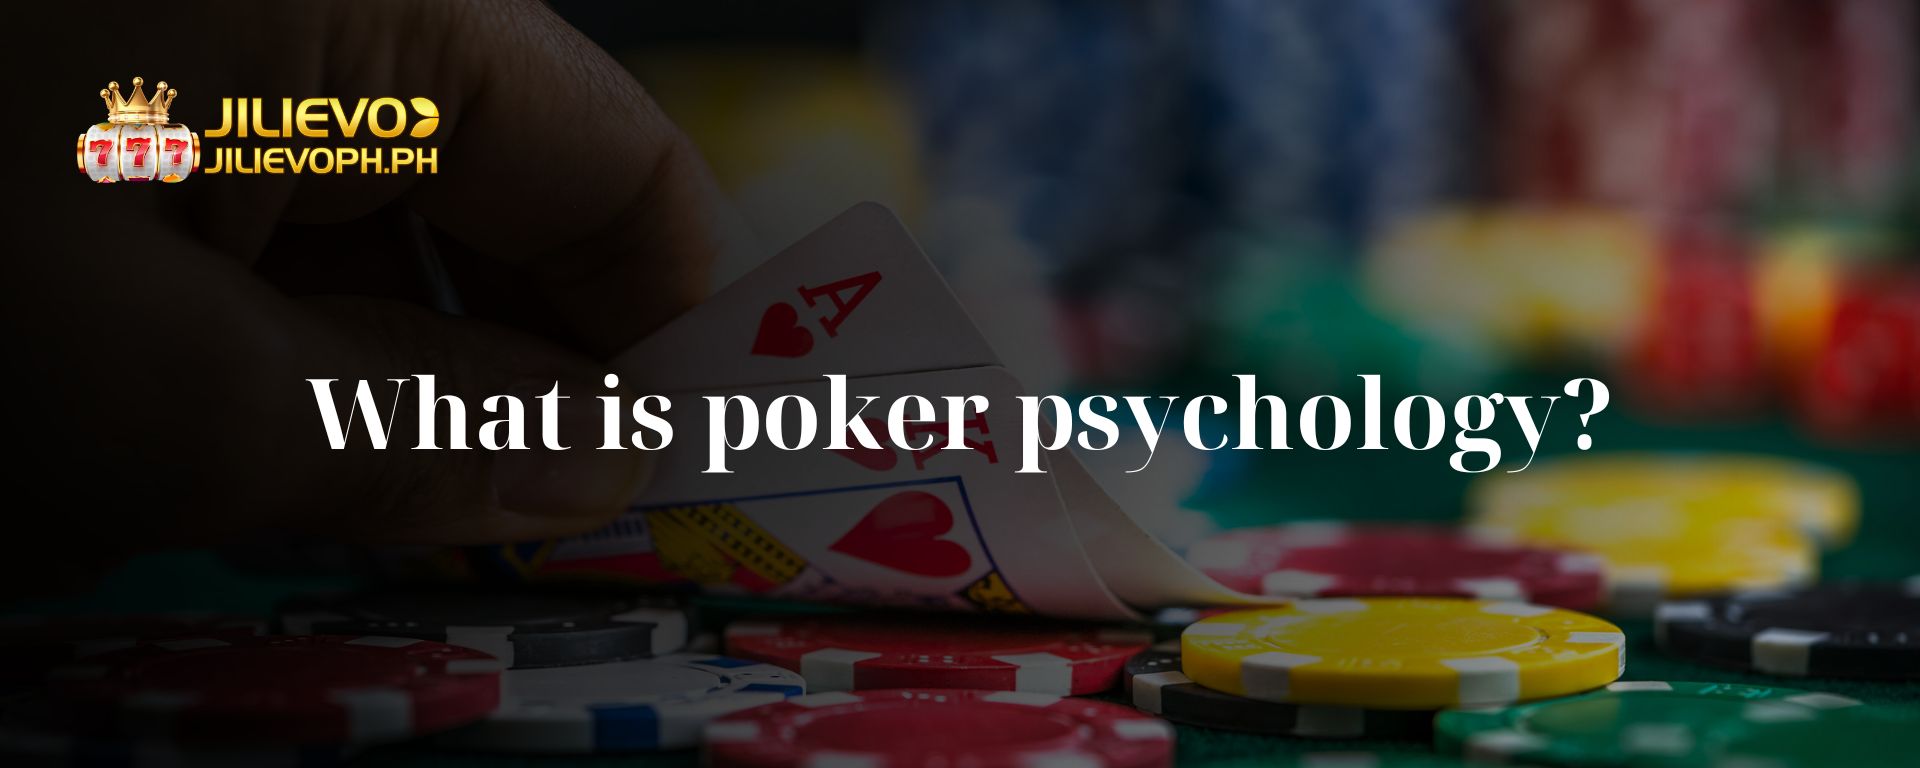 What is poker psychology?